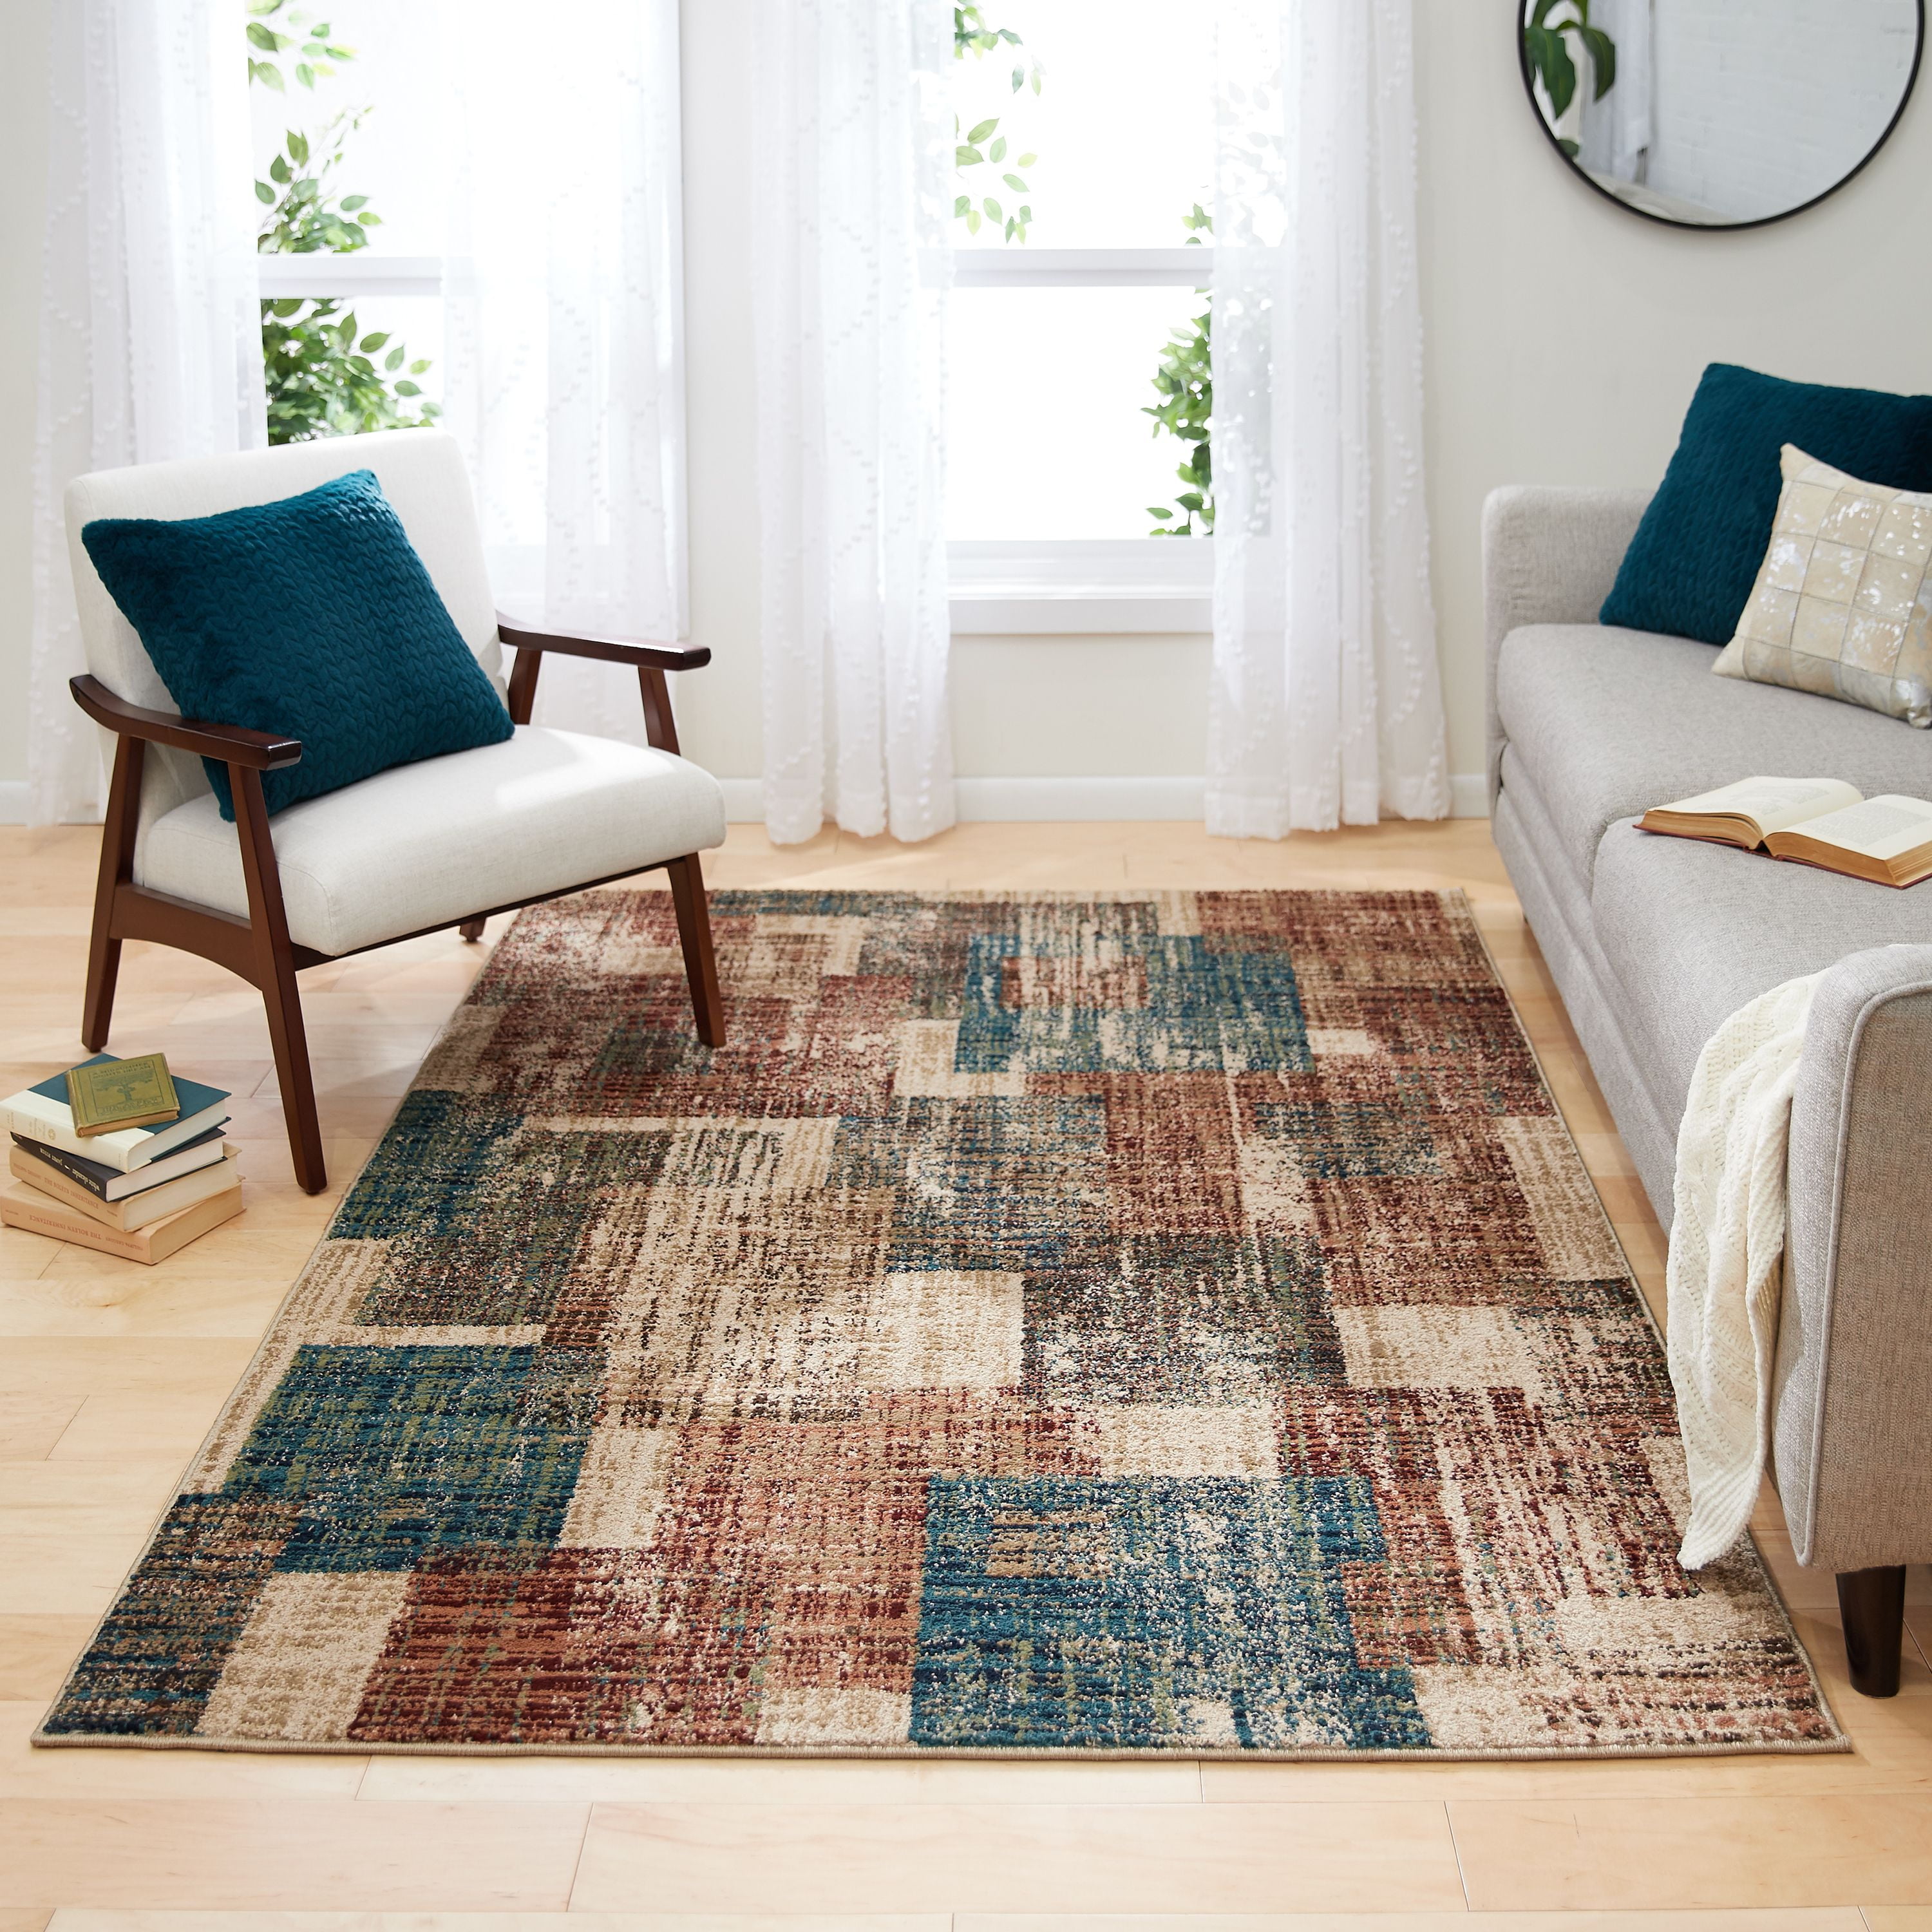 Mainstays Abstract Tiles Indoor Living, 7 X 7 Rug